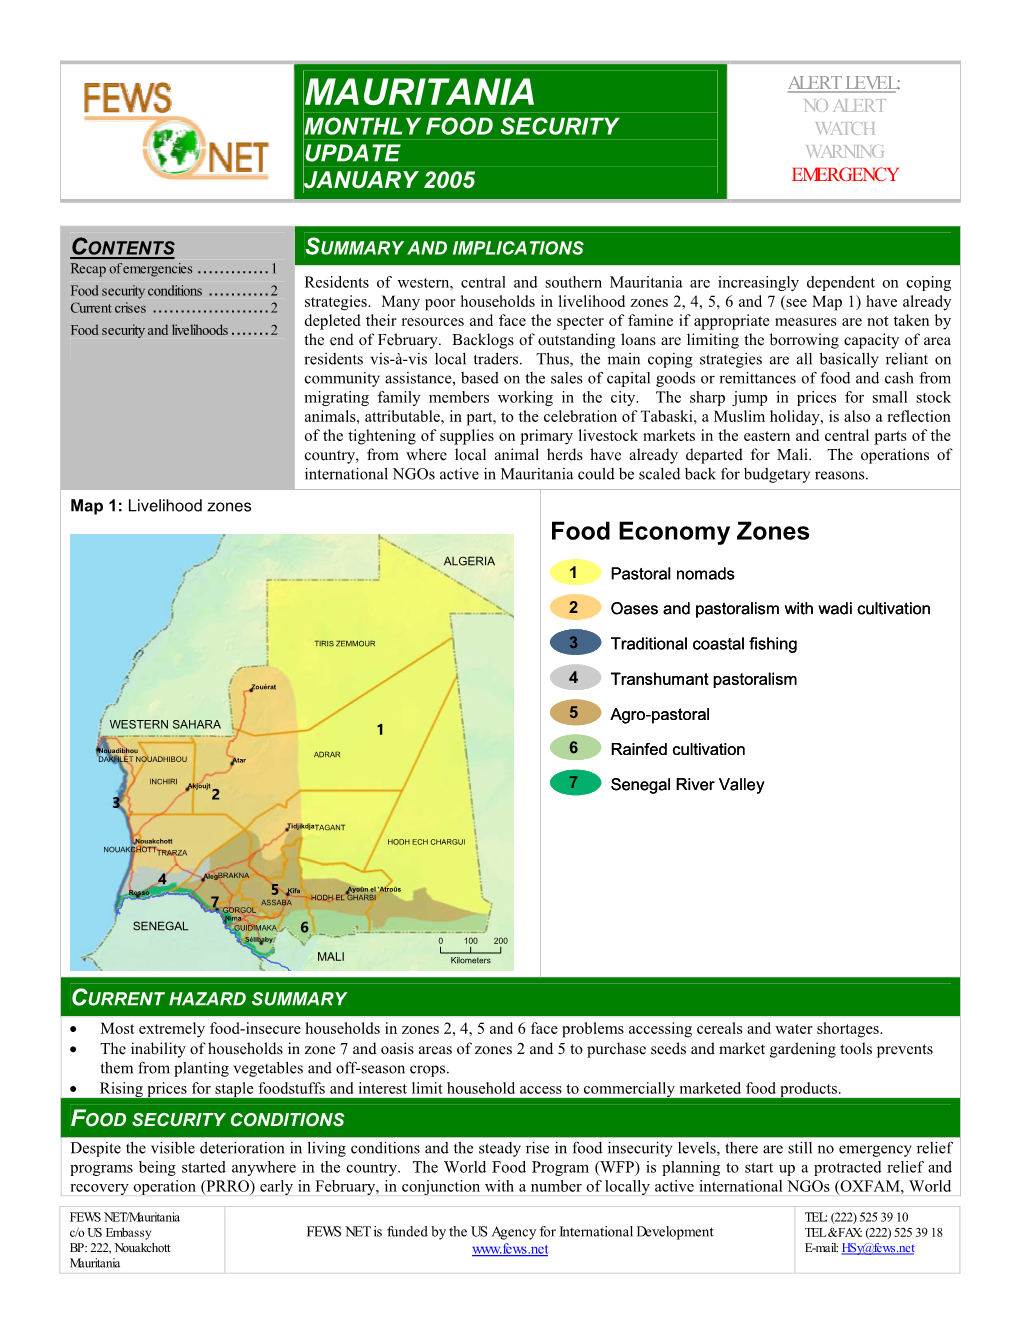 Mauritania No Alert Monthly Food Security Watch Update Warning January 2005 Emergency